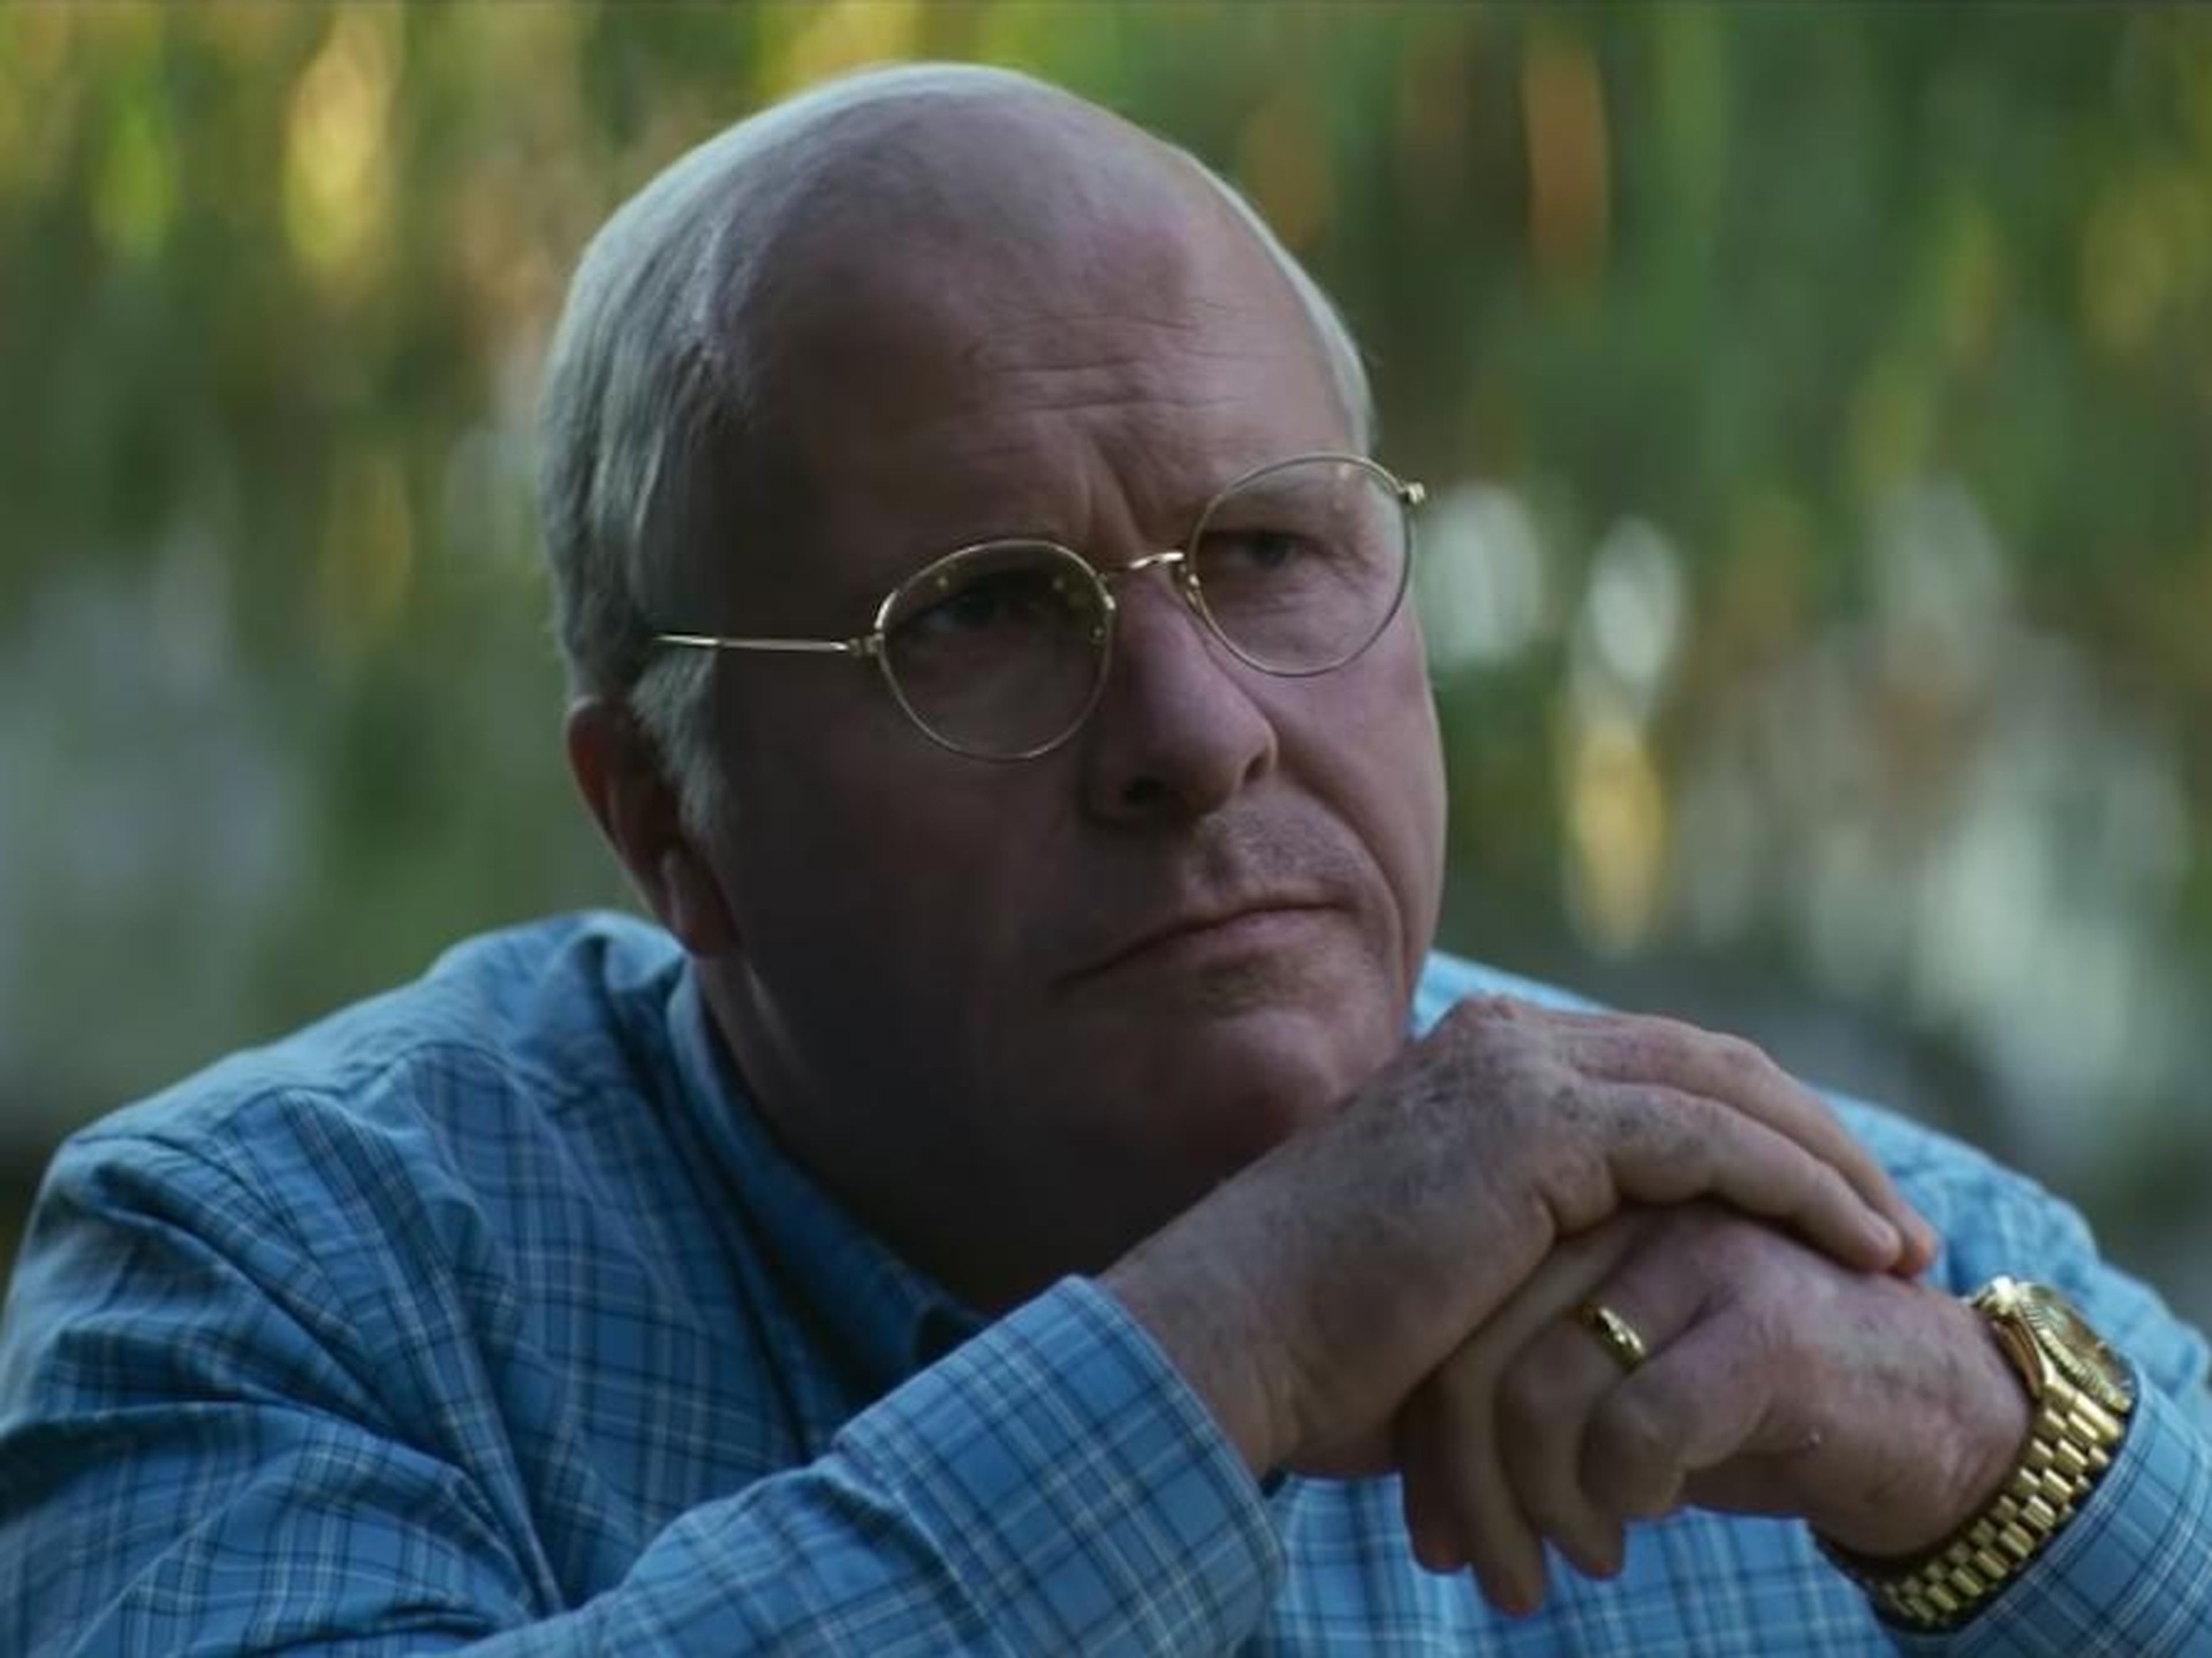 Christian Bale in "Vice."